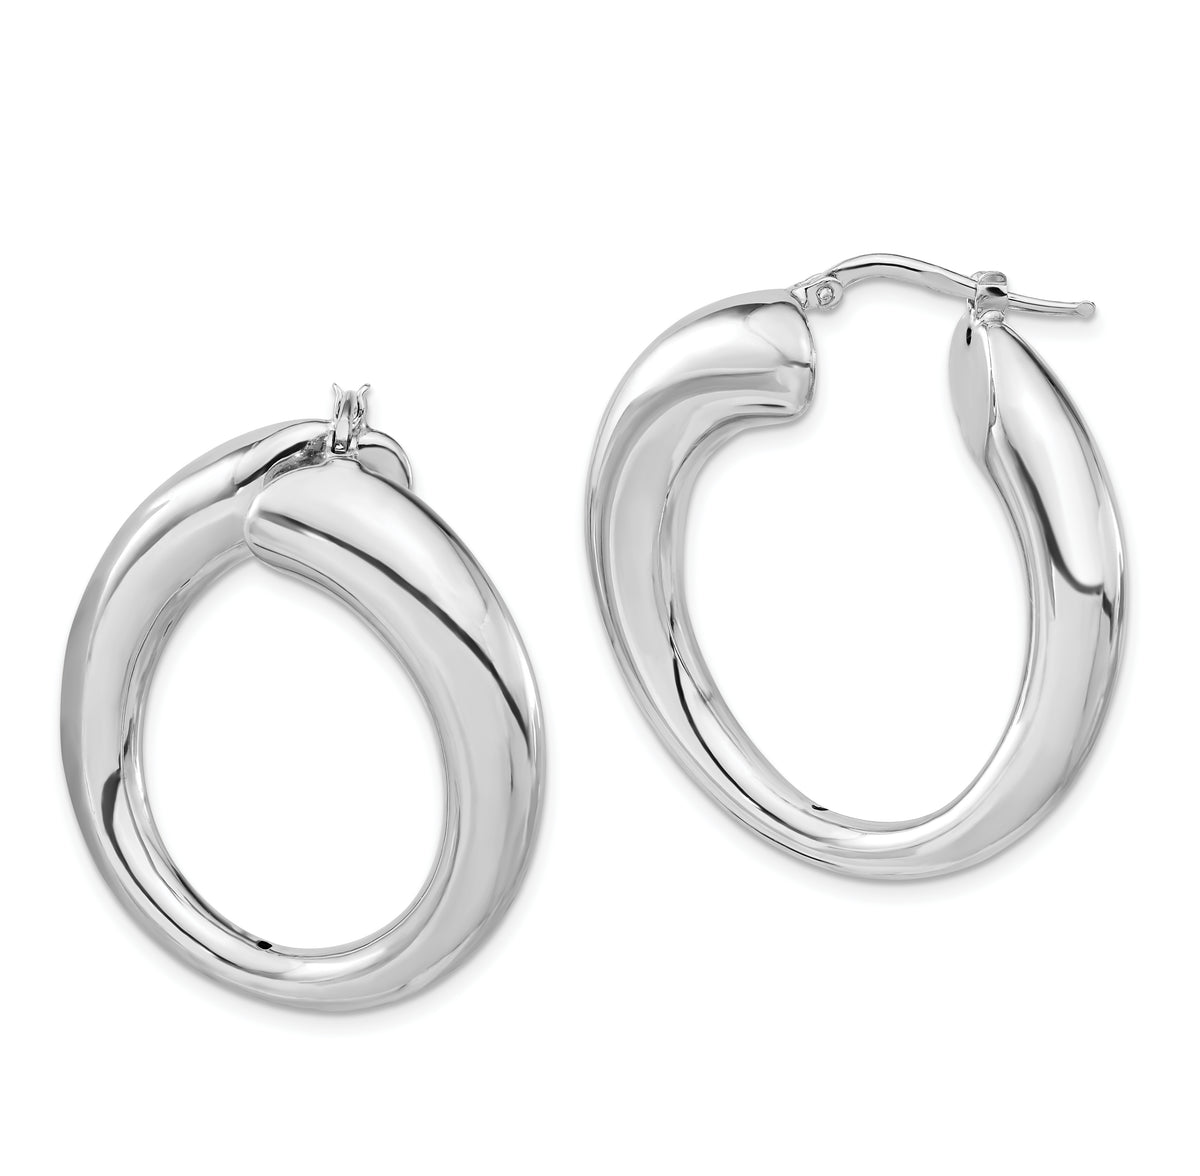 Sterling Silver Polished Twisted Round Hoop Earrings